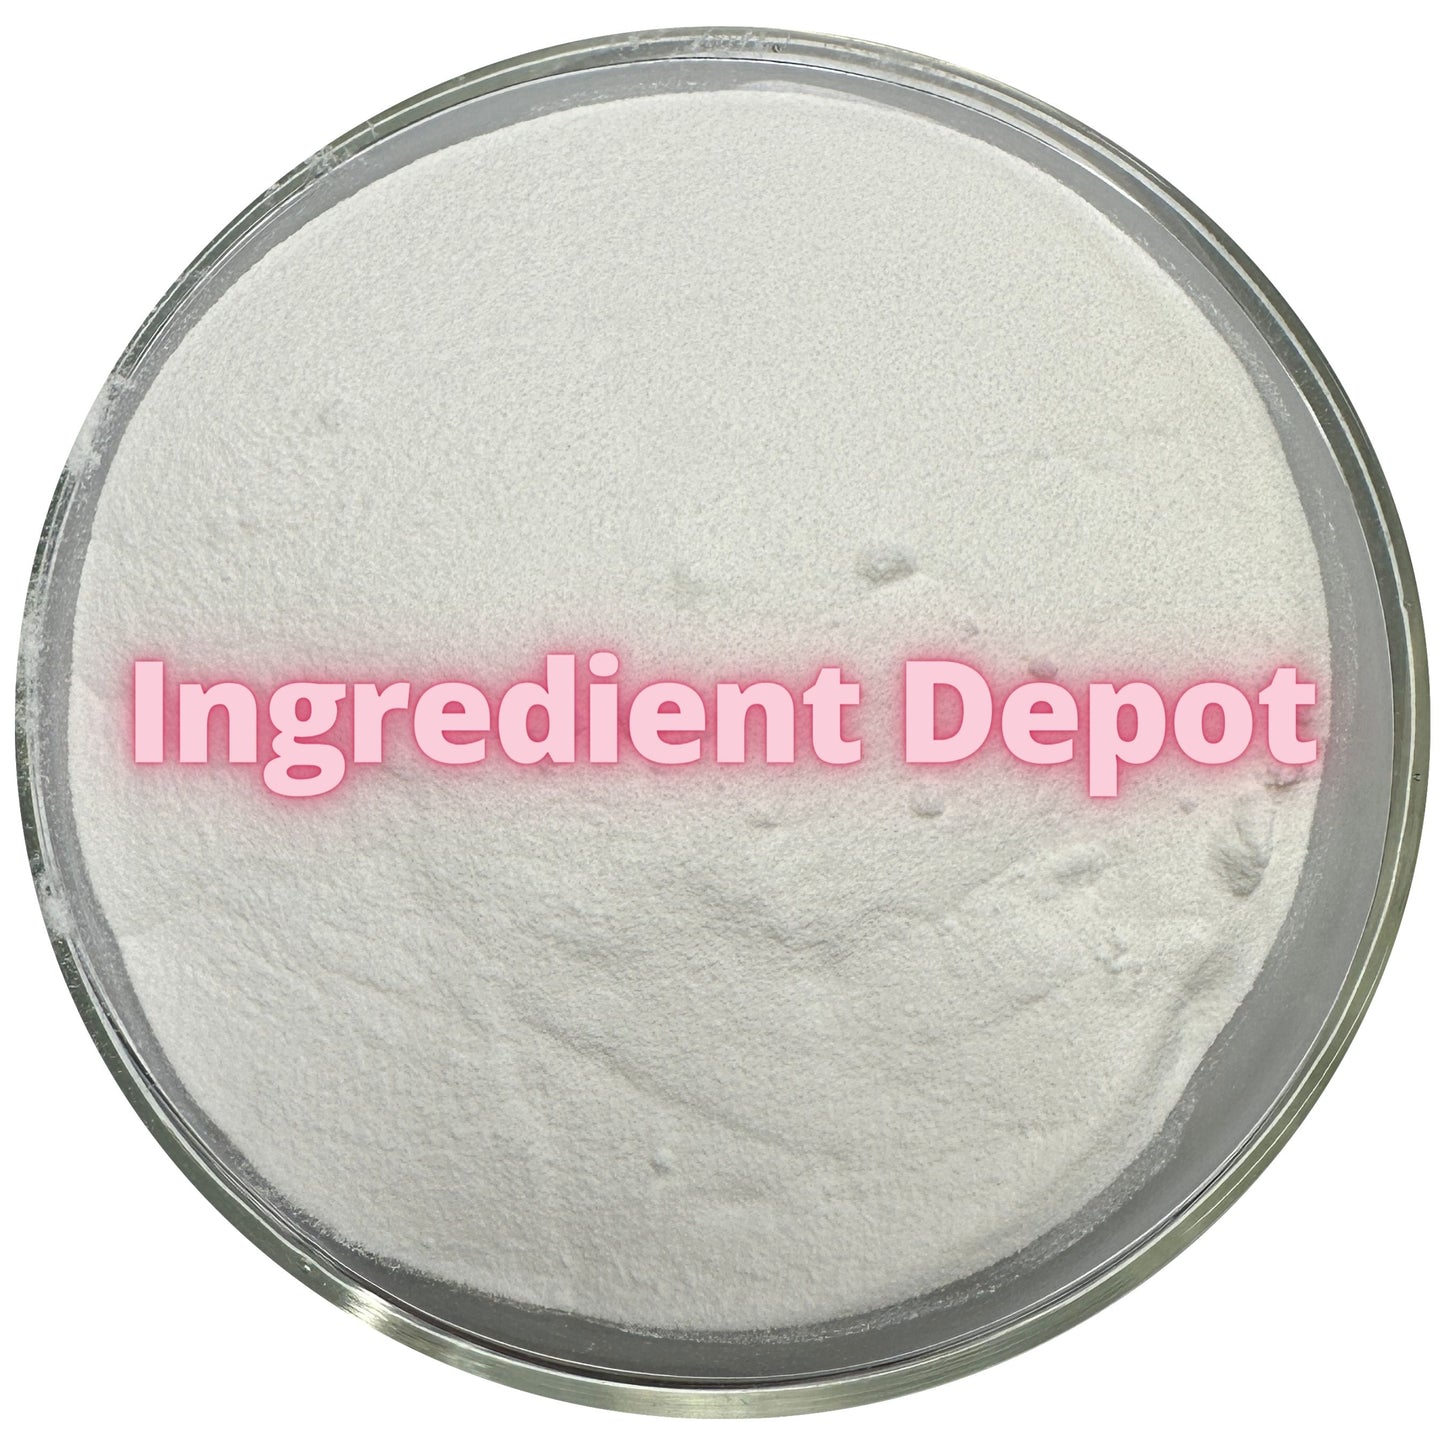 SMCC 90 HD Silicified Microcrystalline Cellulose - USP/NF Grade 3 kgs - Ingredient Depot